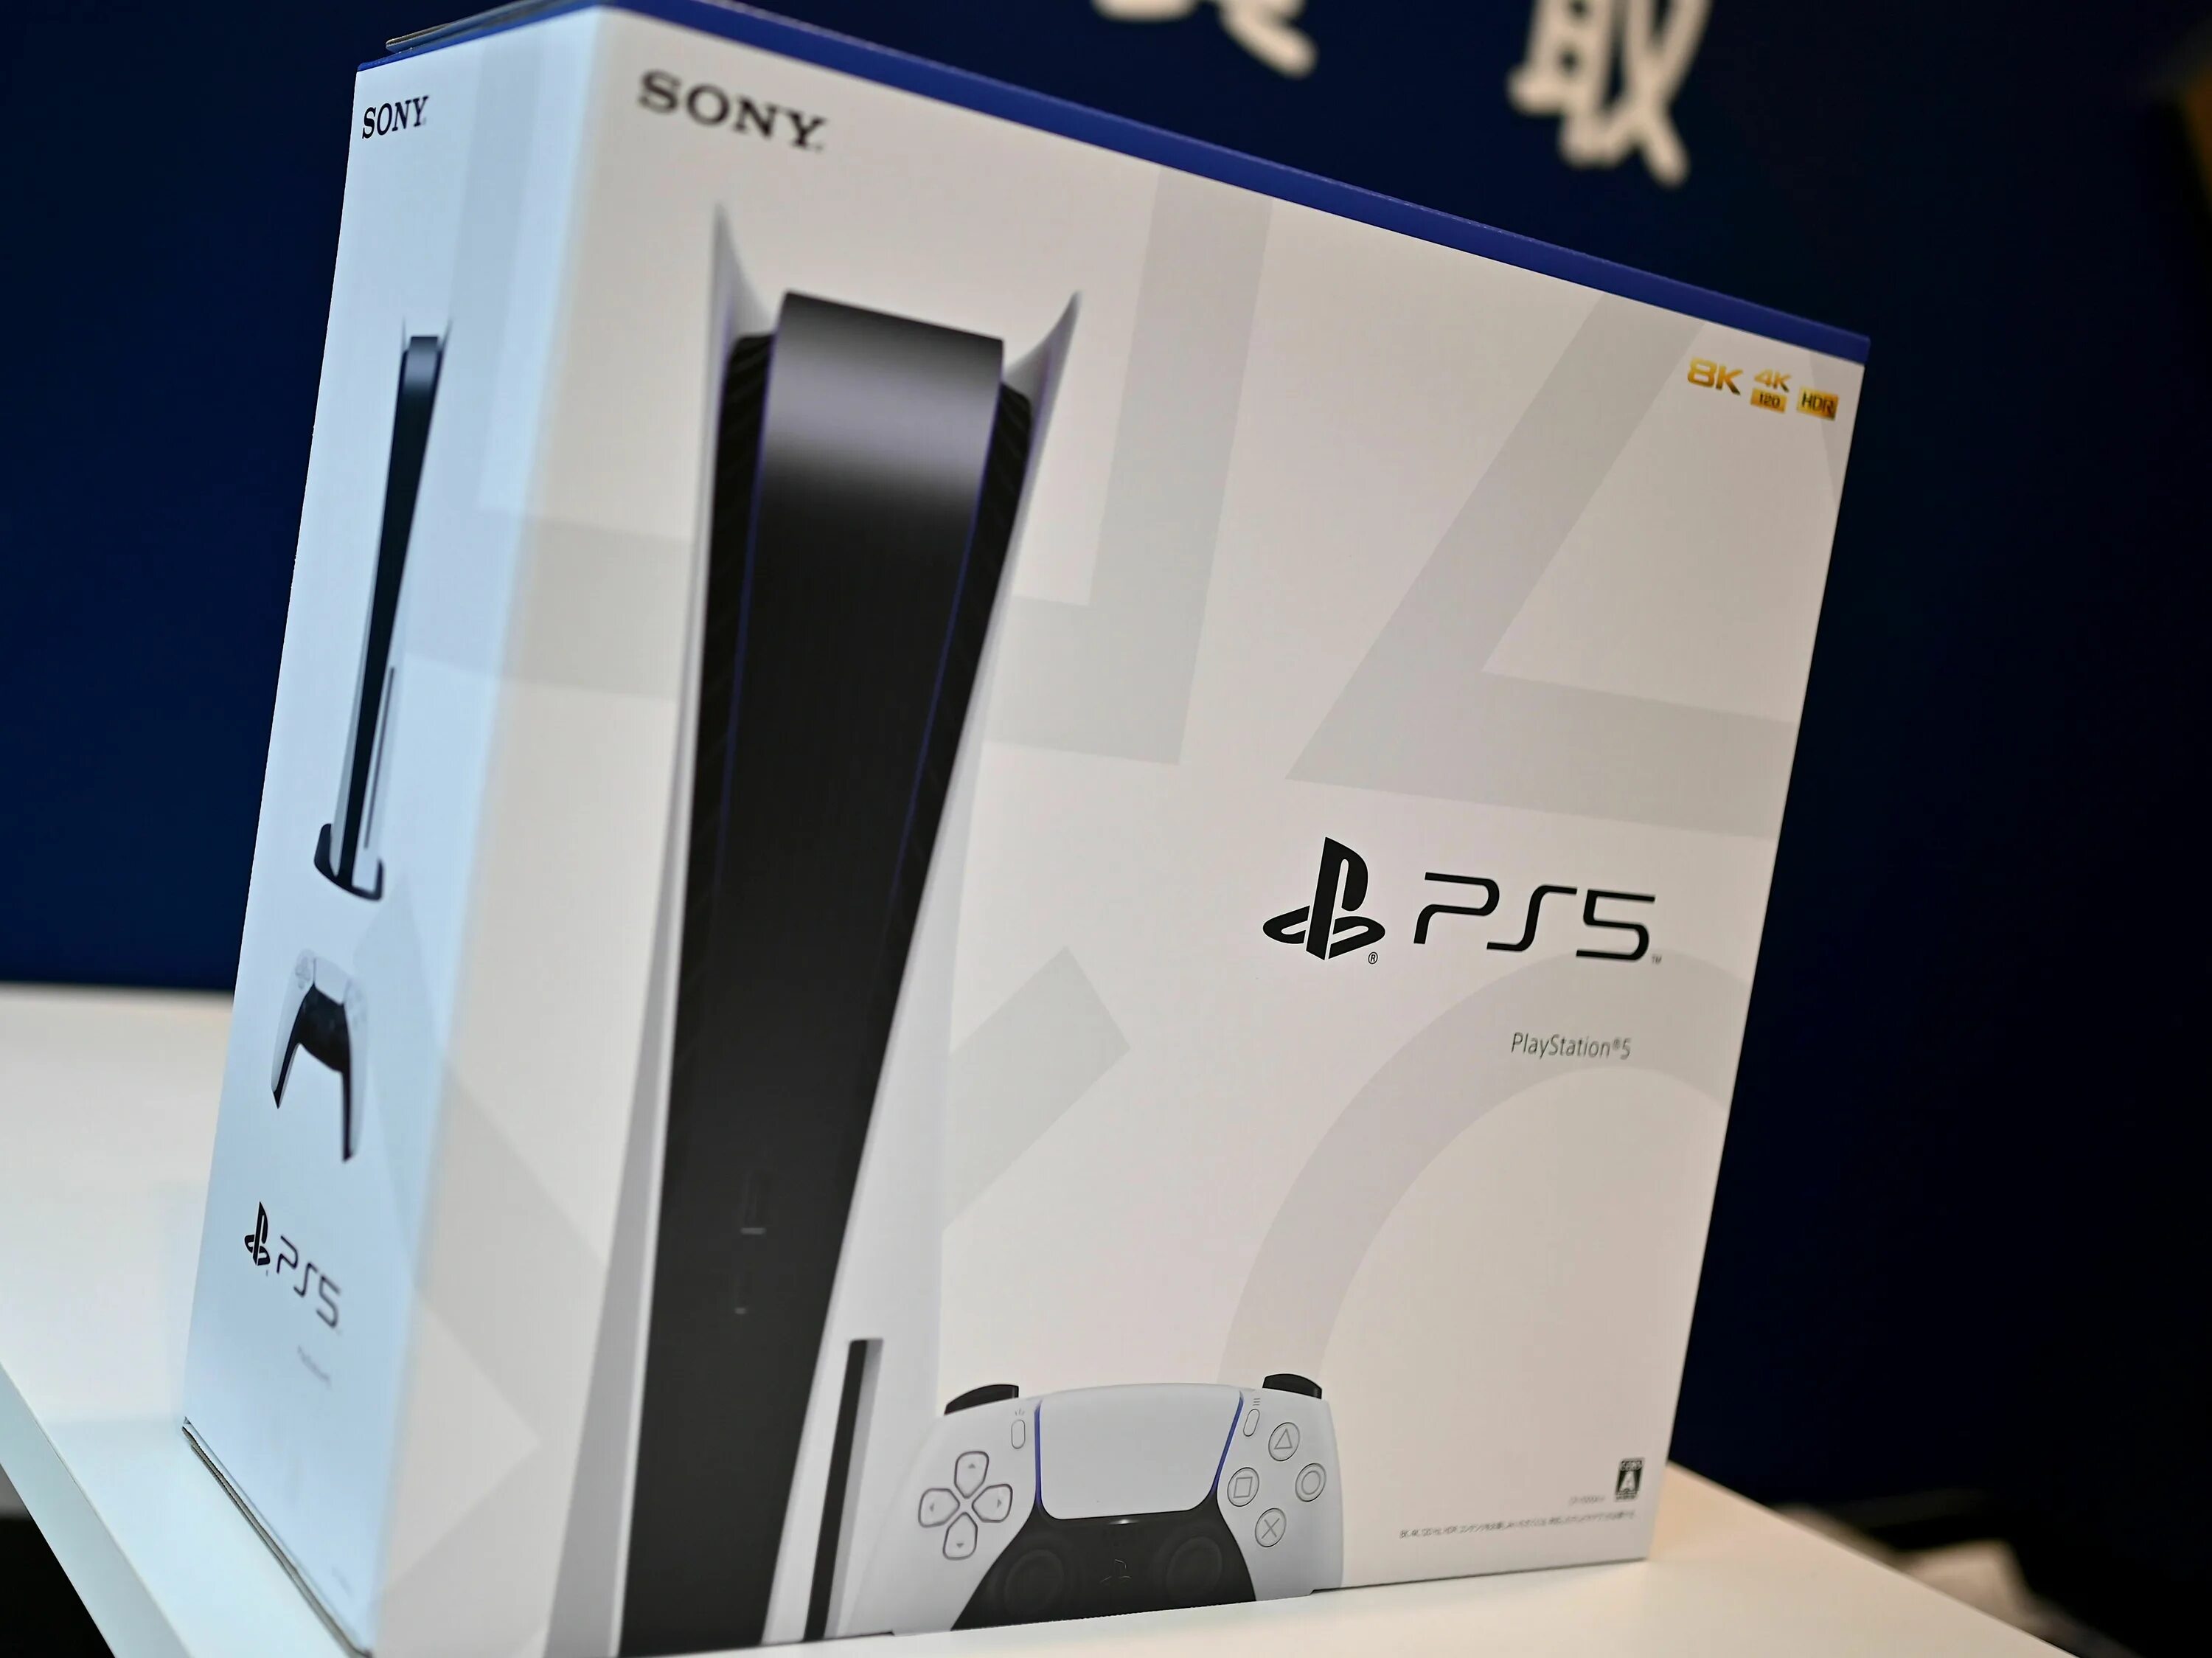 Sony ps5. Sony PLAYSTATION ps5. Sony PLAYSTATION ps5 Console. Sony PLAYSTATION 5.